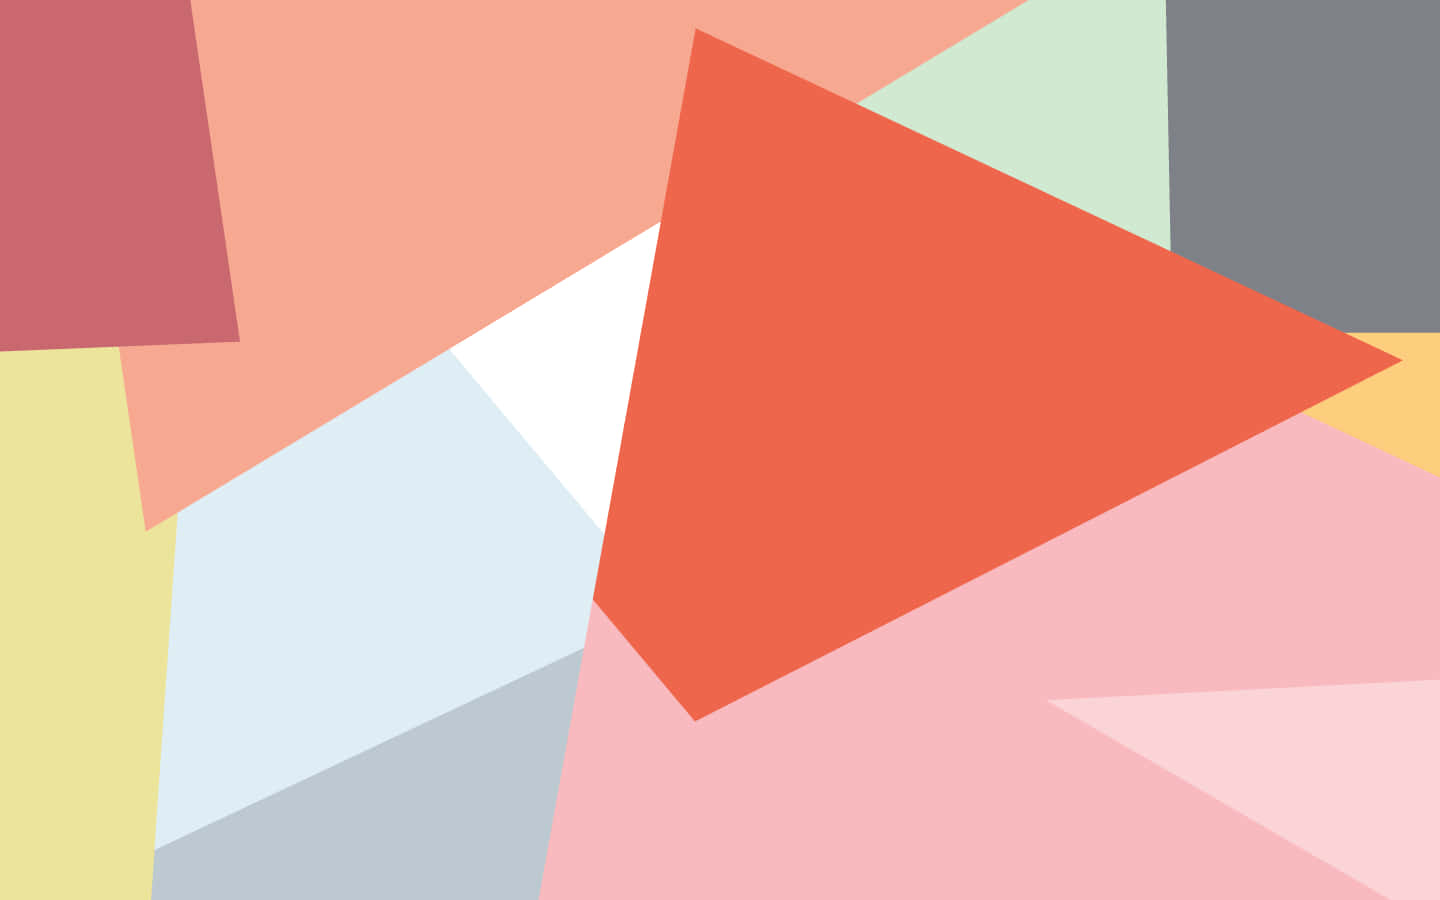 A Colorful Abstract Background With Triangles Wallpaper